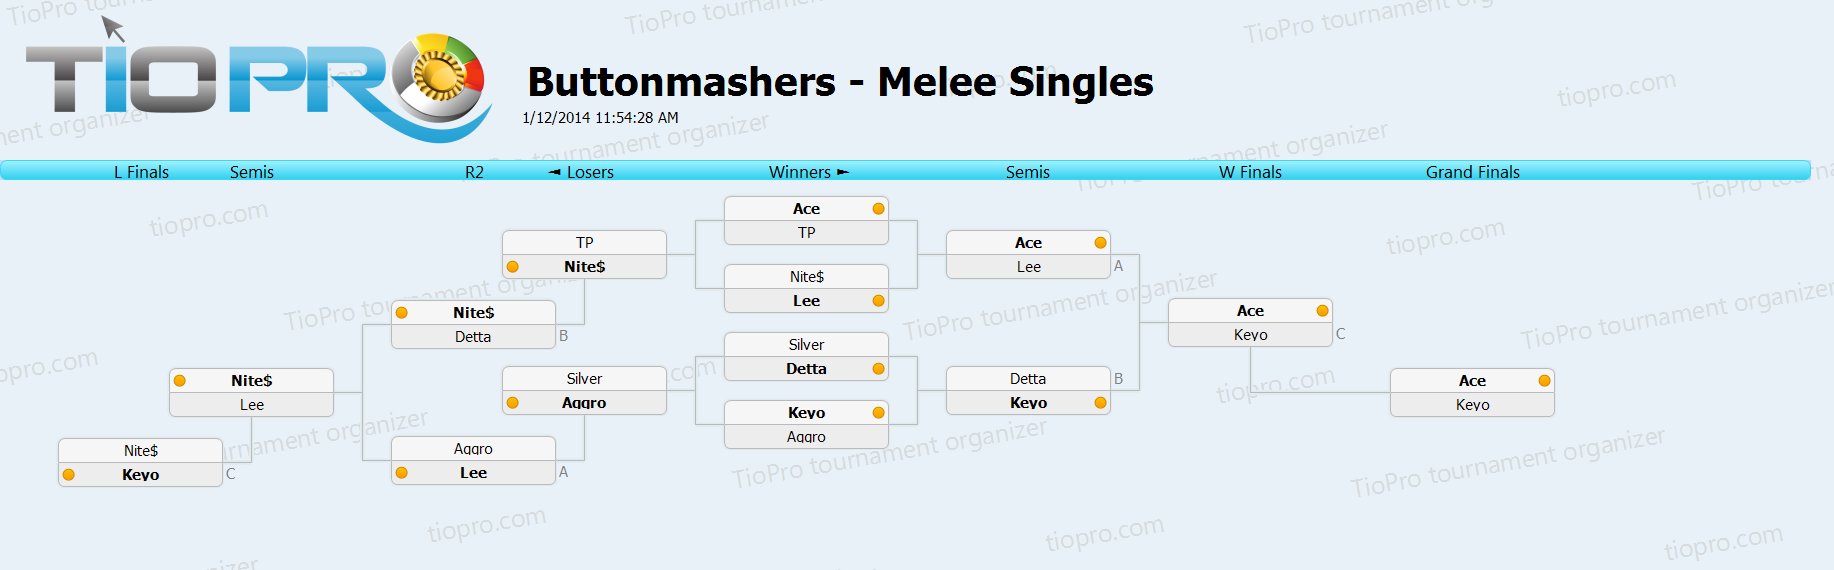 Buttonmashers - Melee Singles